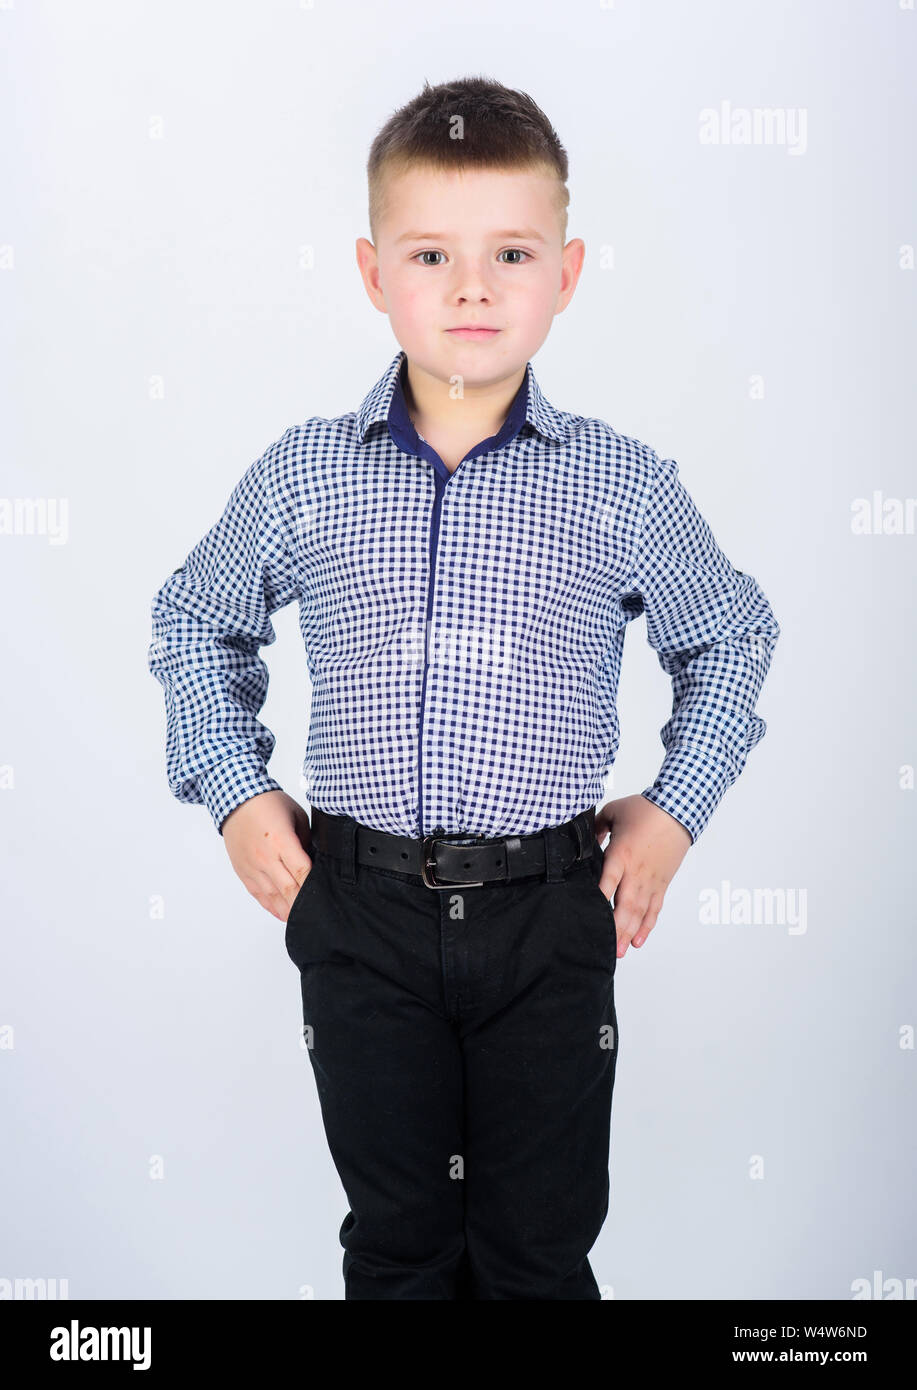 business casual for kids